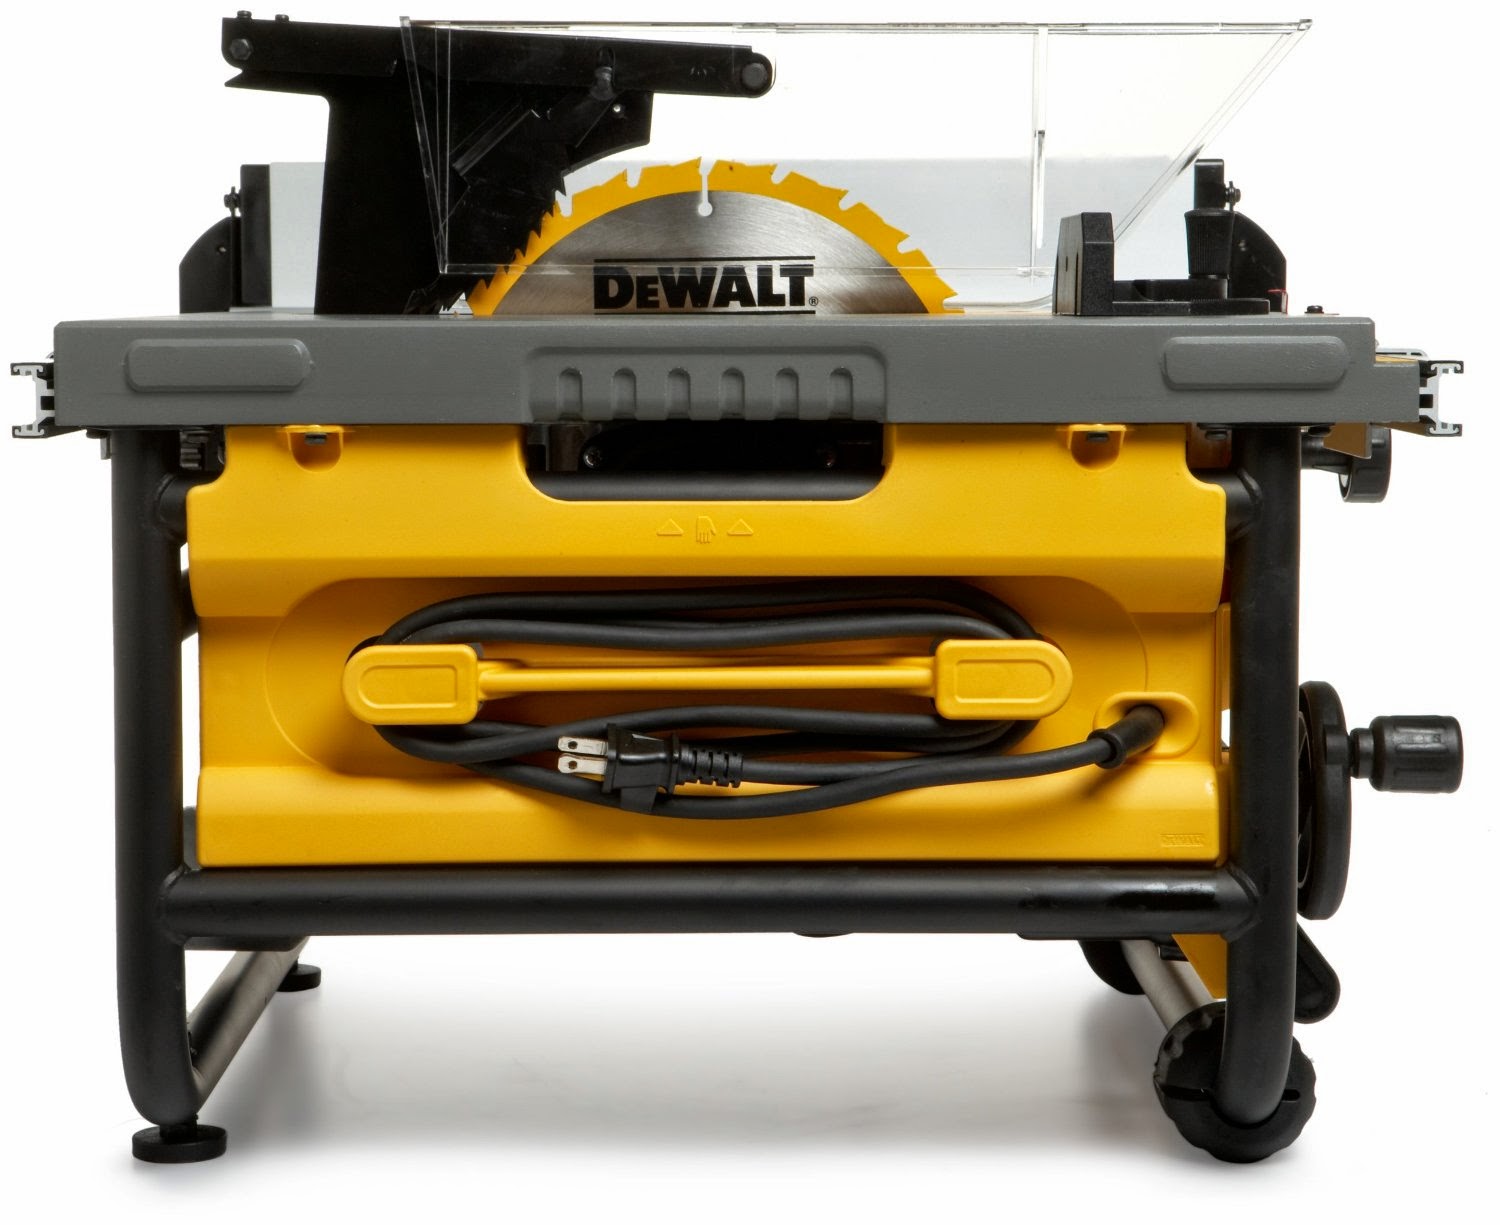 DEWALT DW745 Compact Job-Site Table Saw with 20" max rip capacity, adjustable blade from 0-45 degrees, rack and pinion rail design